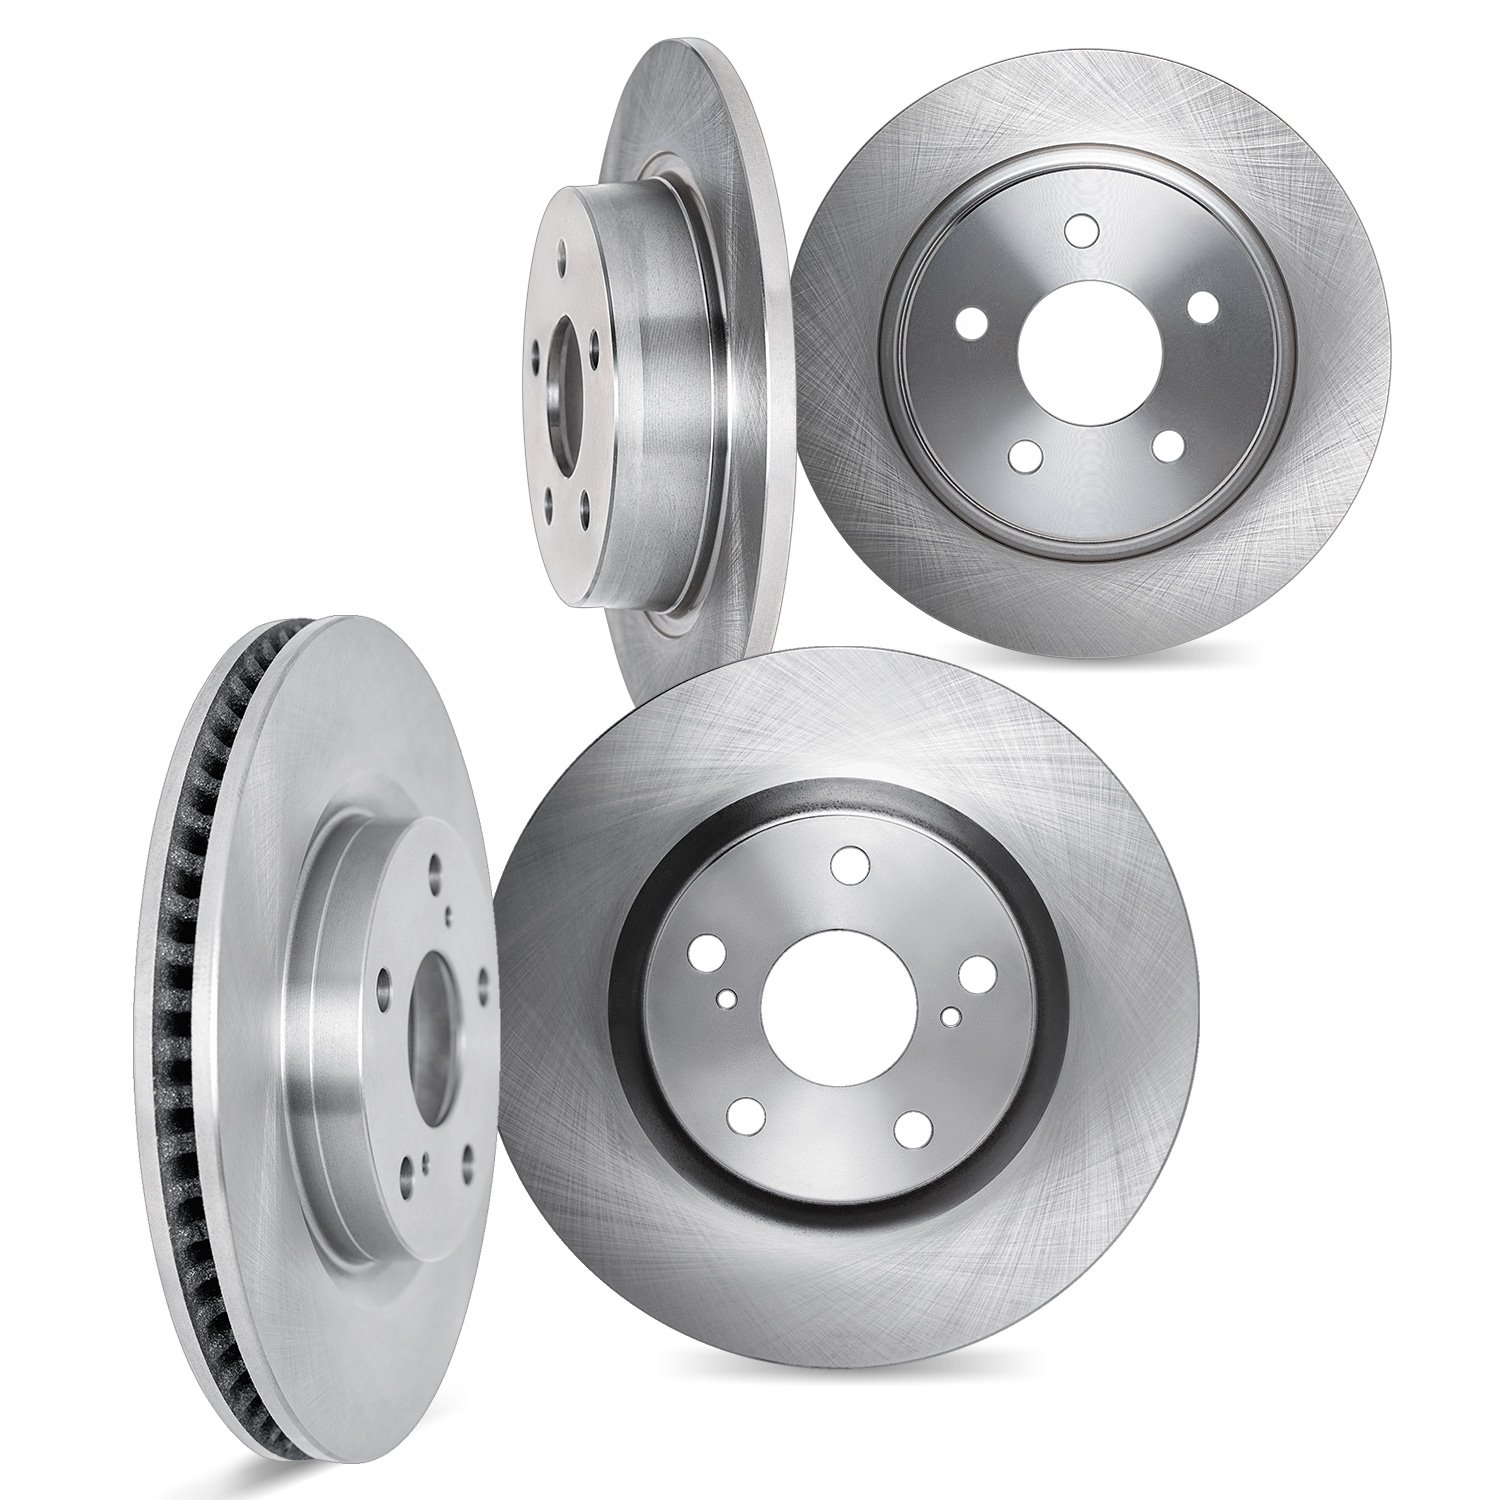 6004-42006 Brake Rotors, Fits Select Mopar, Position: Front and Rear